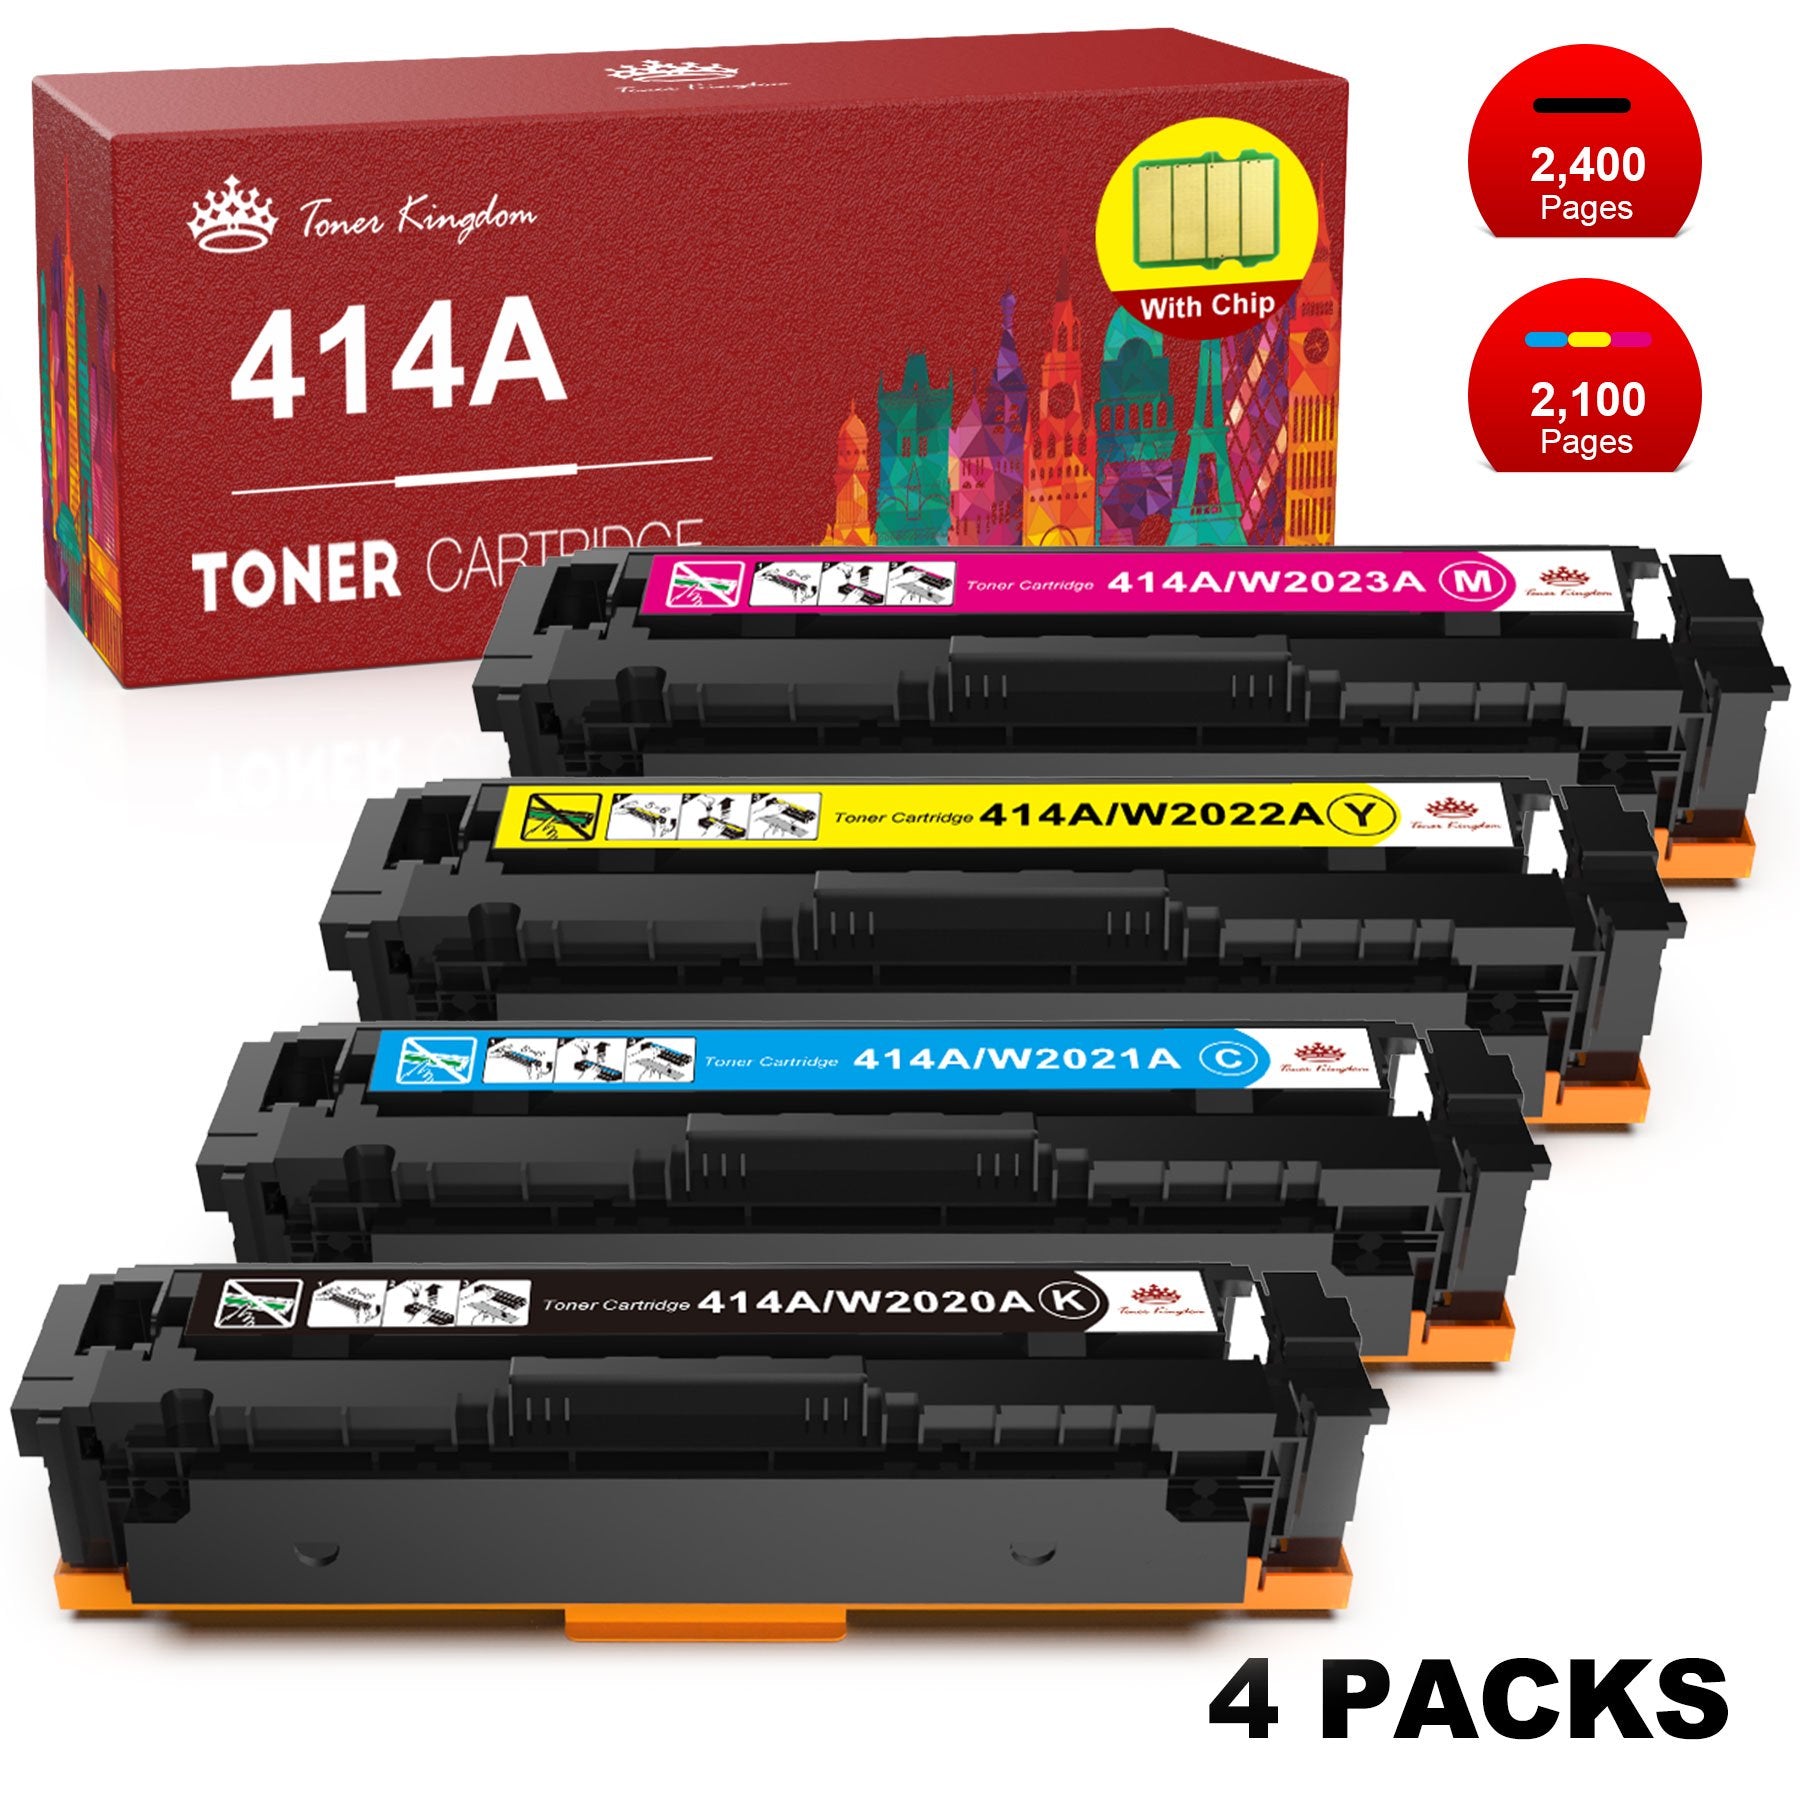 414A Toner Cartridge (With Chip) Compatible Toner Cartridge Replacement-4 Pack